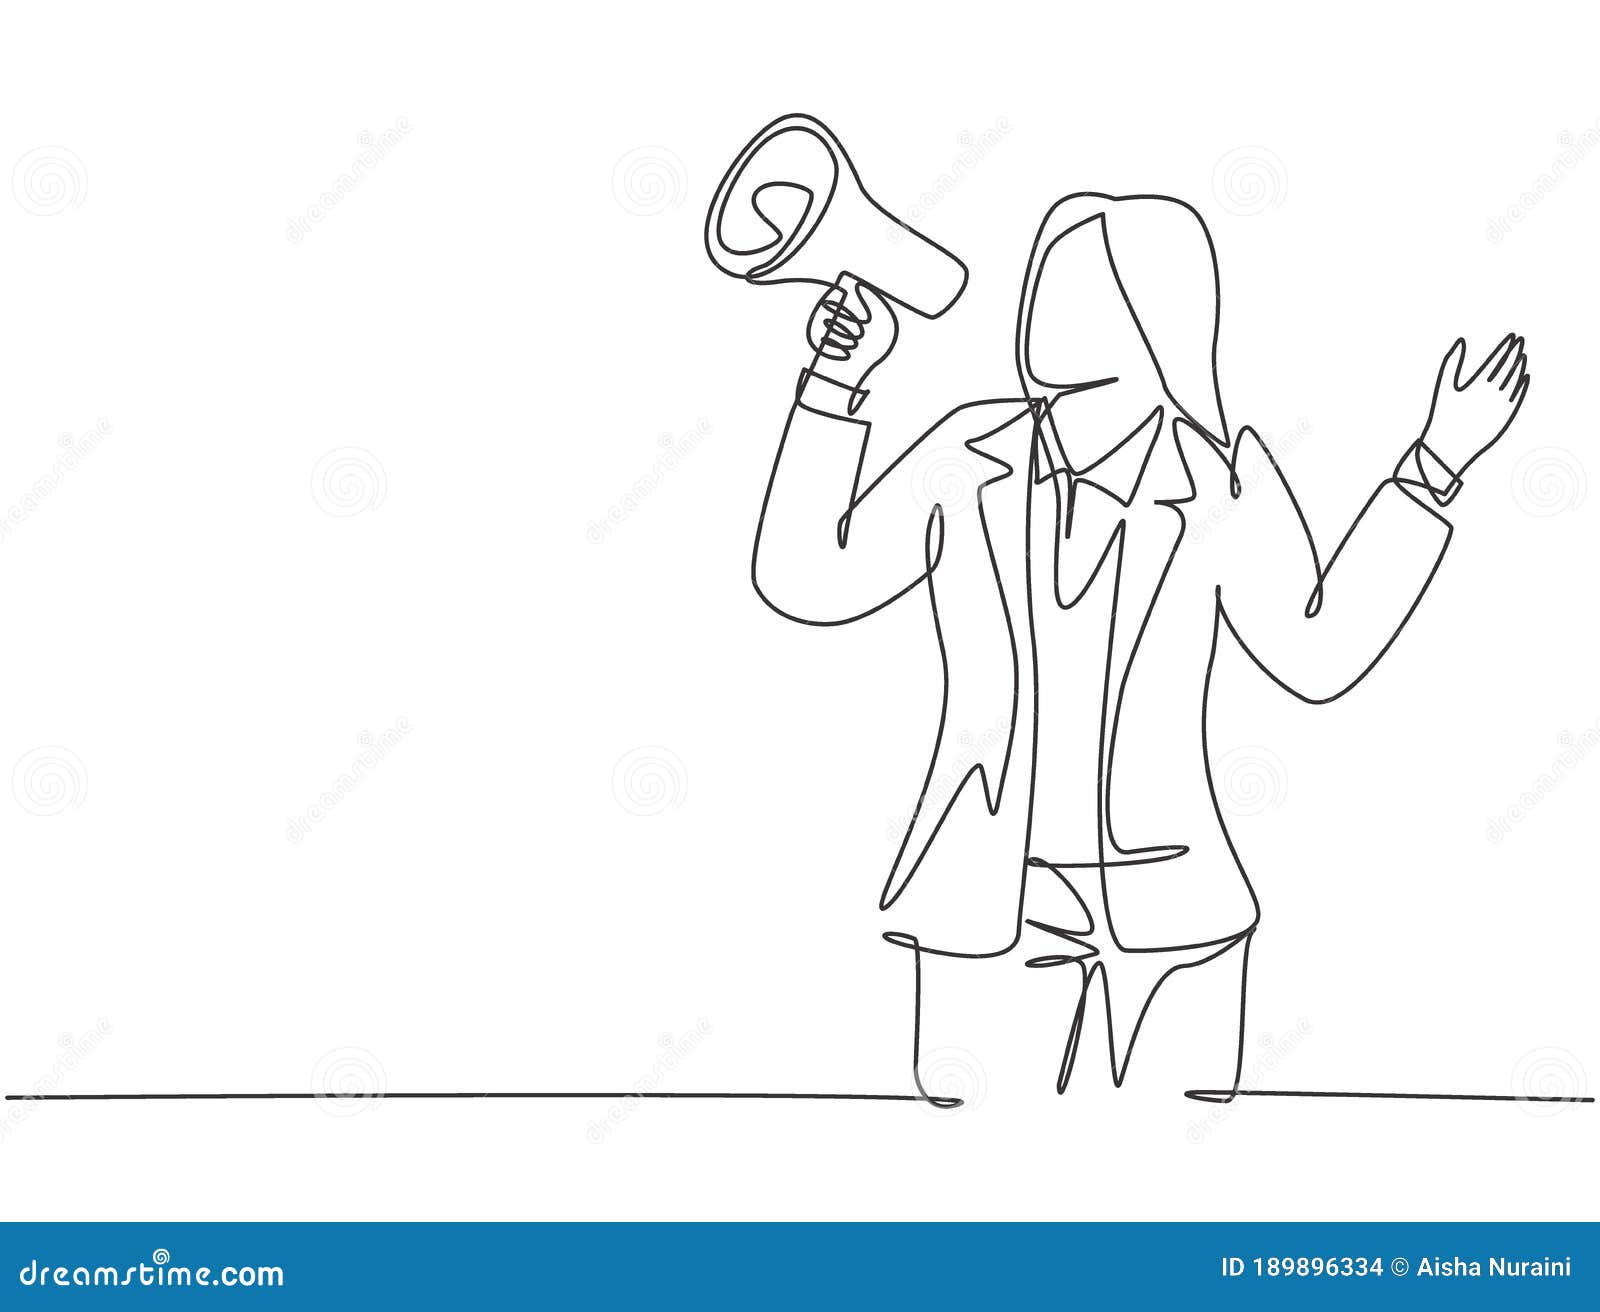 single continuous line drawing of young angry businesswoman shouting loudly using megaphone to train her speak. public speaking